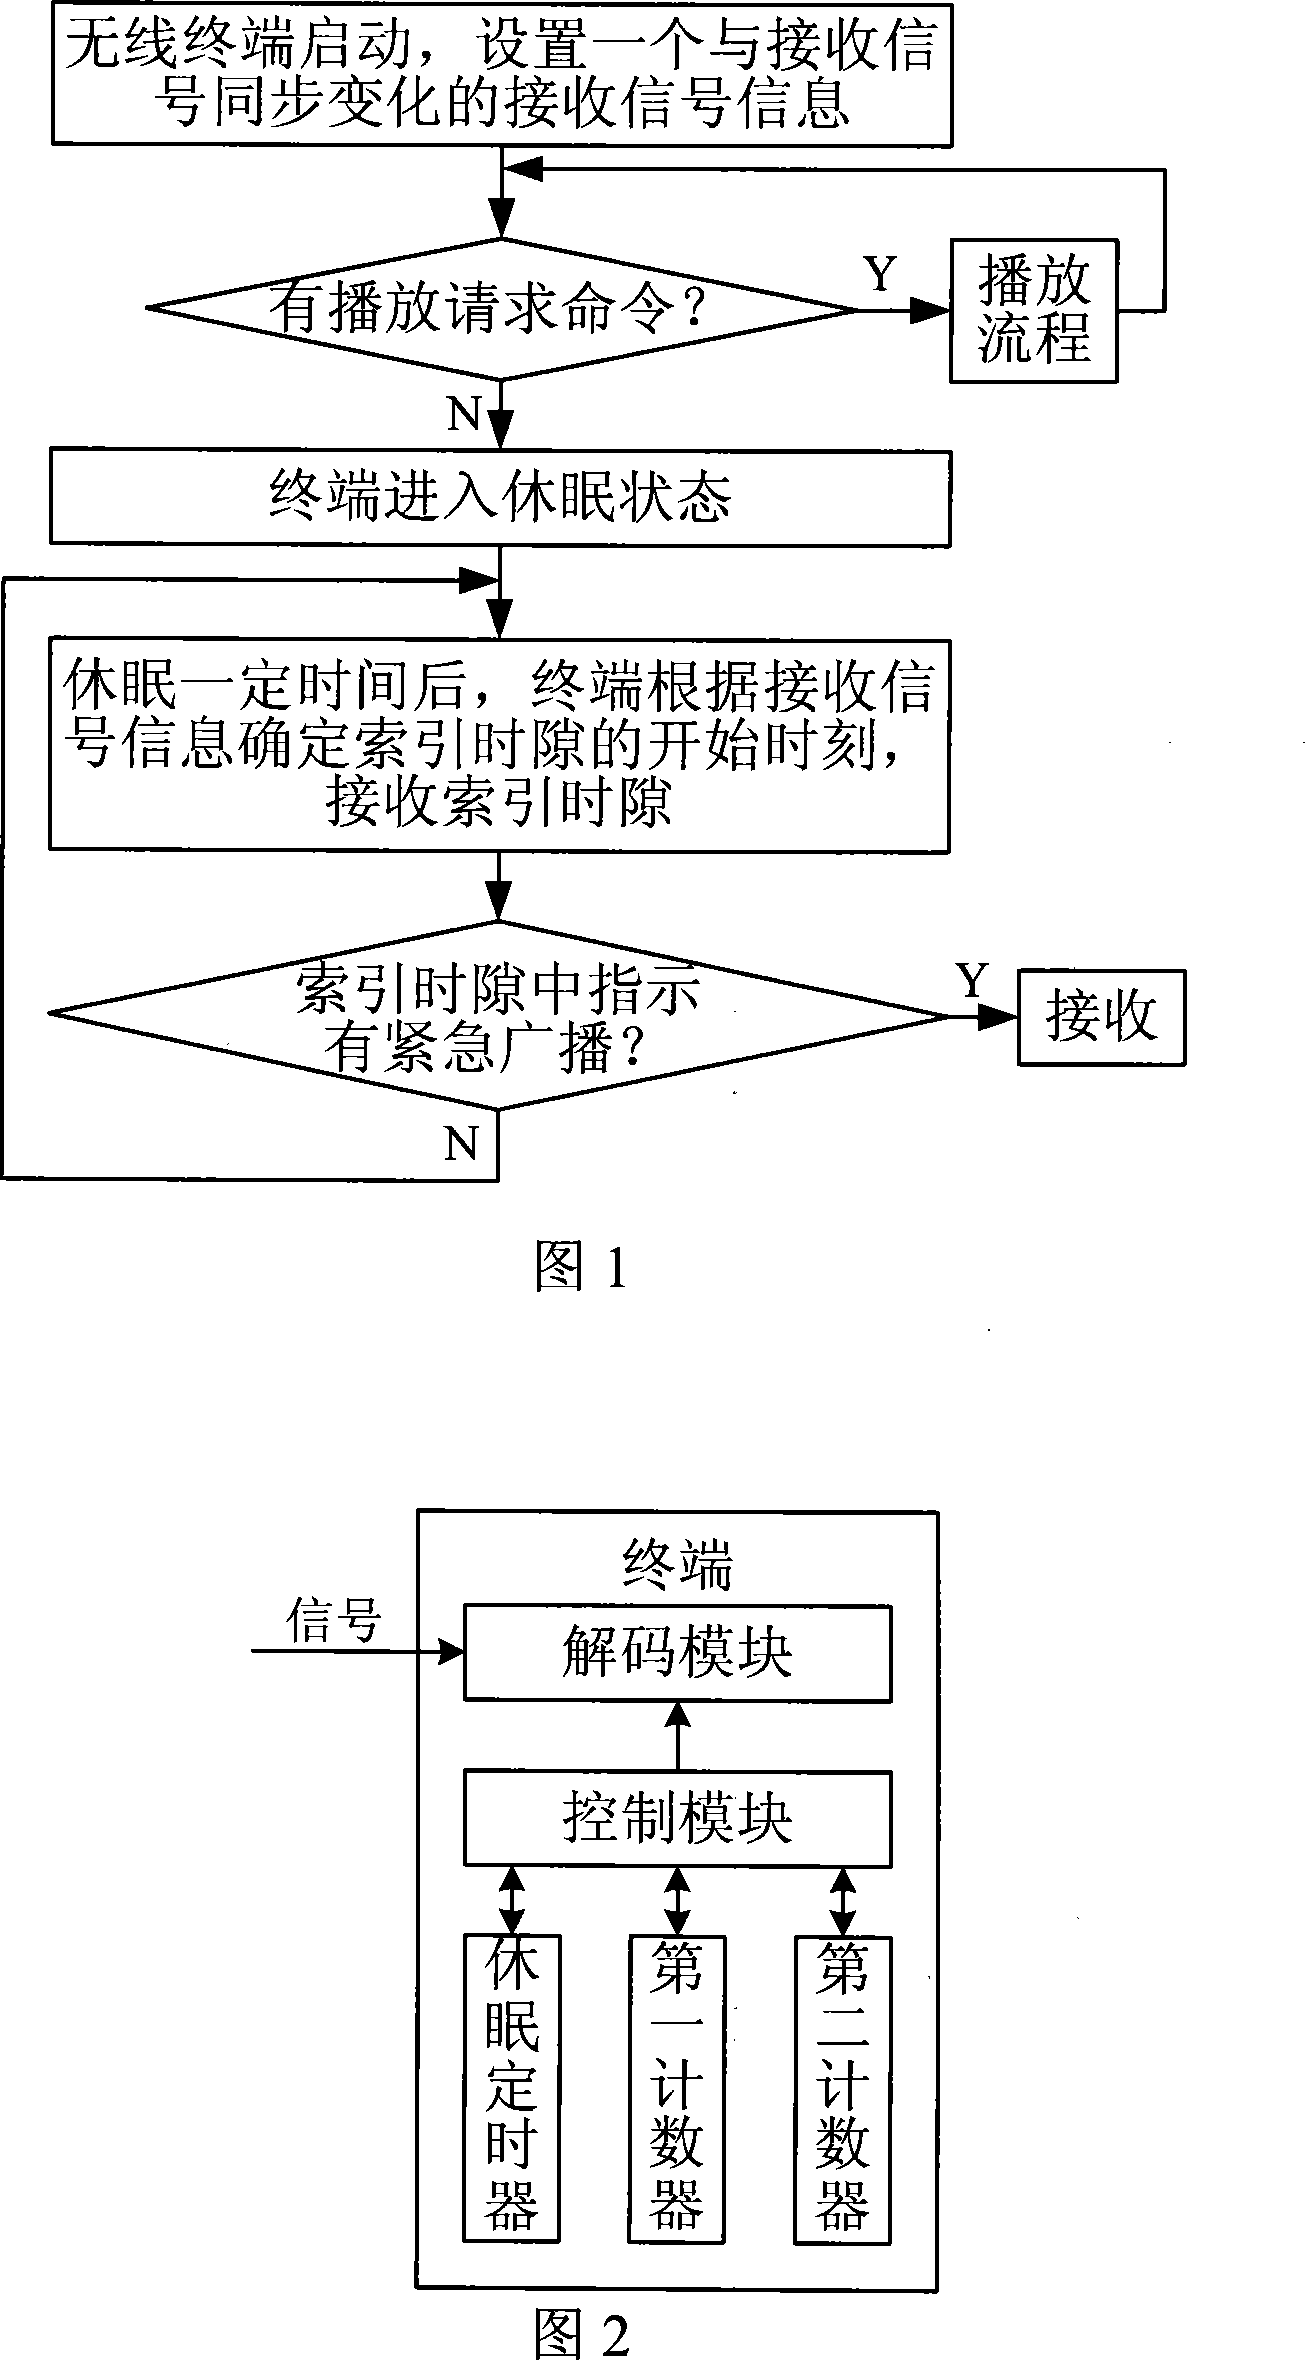 A method and terminal for receiving emergent broadcast under dormancy status